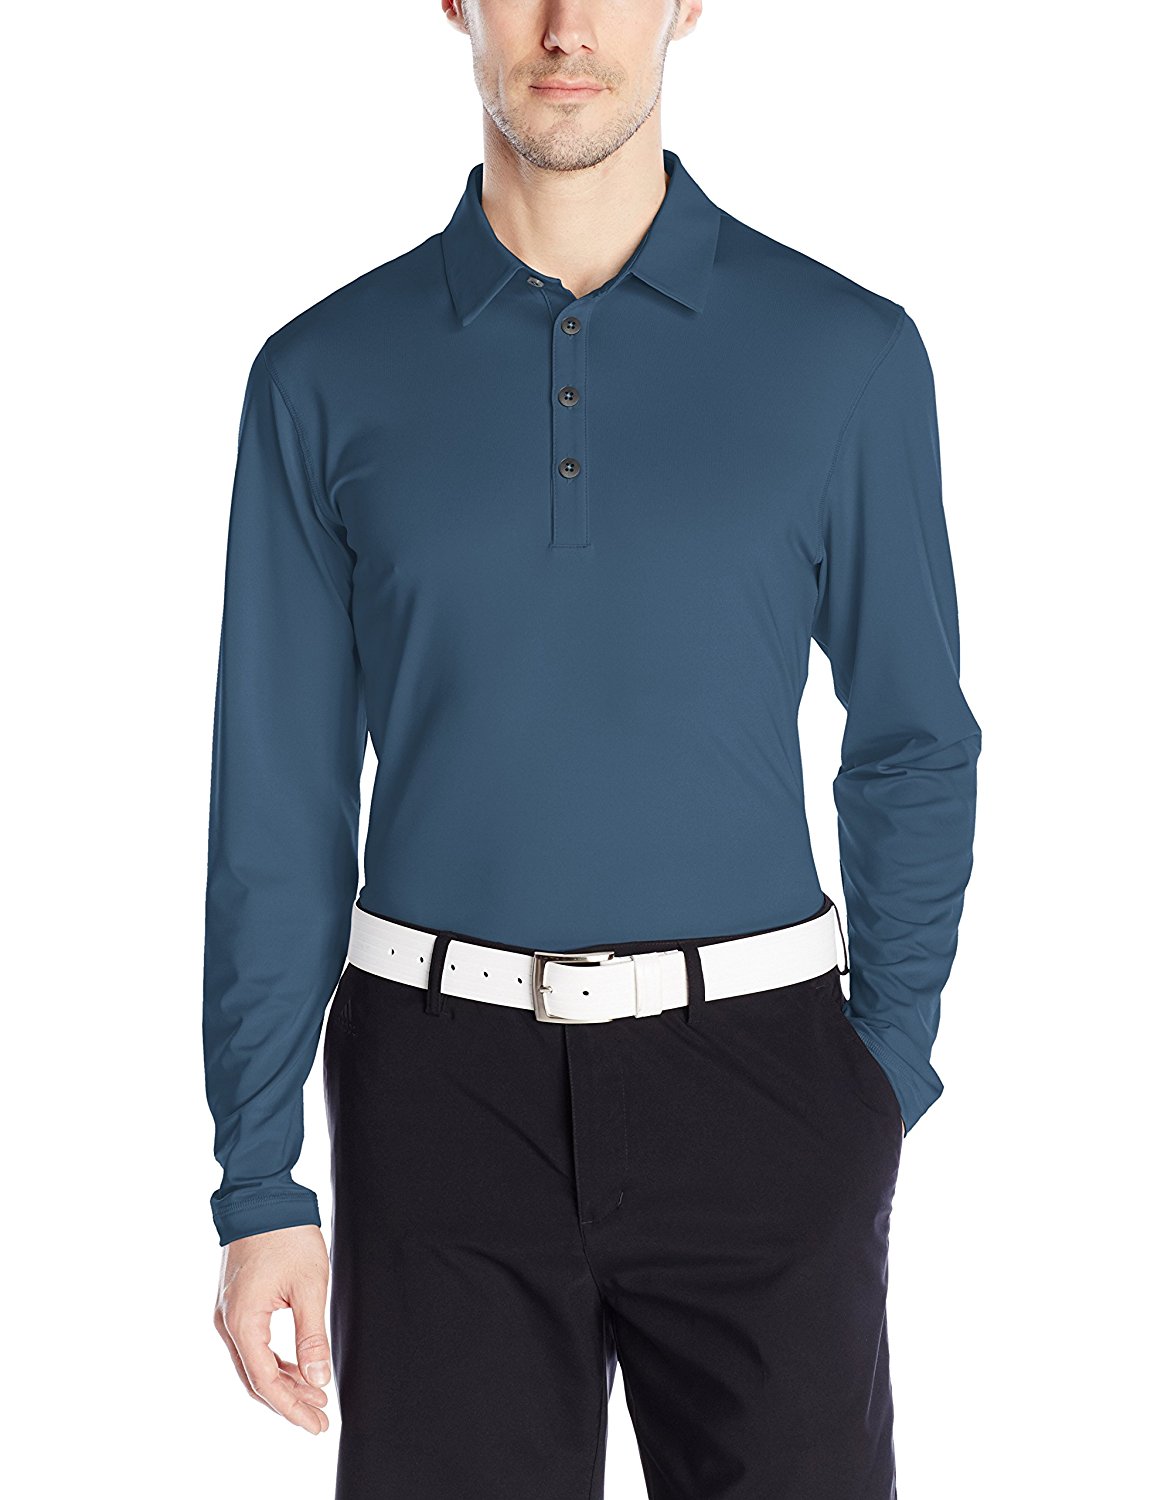 Top 10 Best Golf Shirts Men's Long Sleeve for Cool Weather